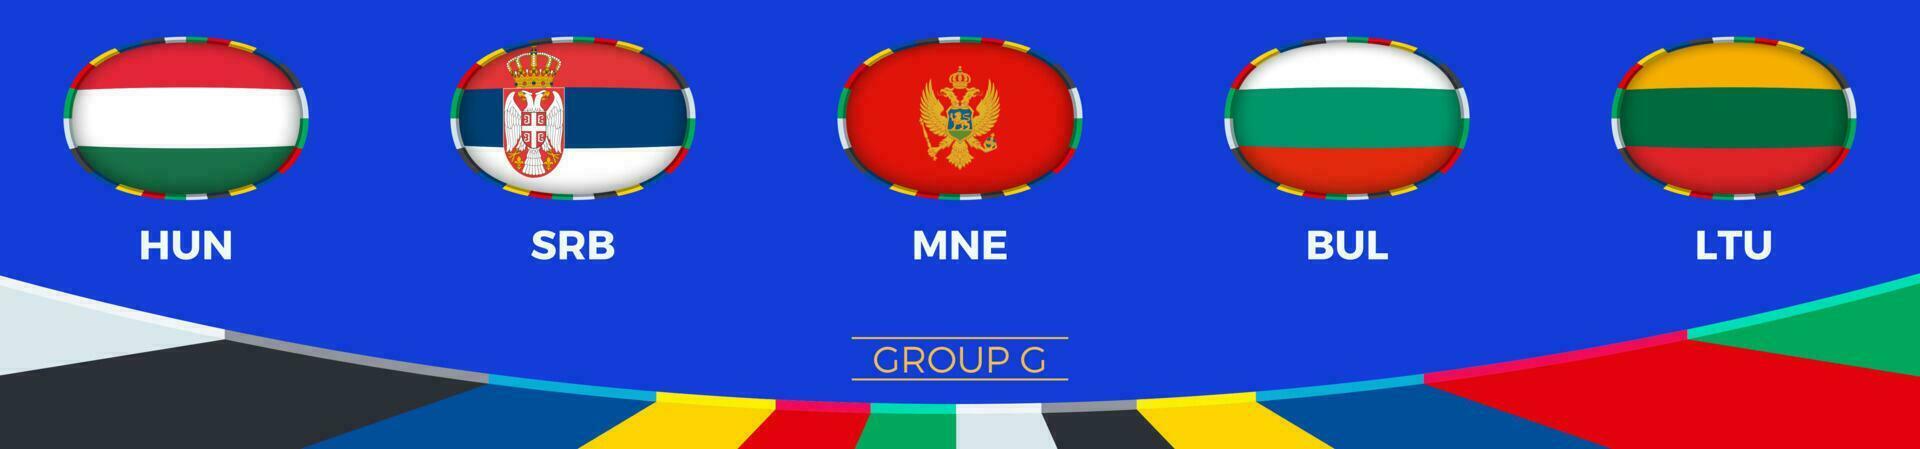 Group G qualifies for the 2024 European football tournament. vector